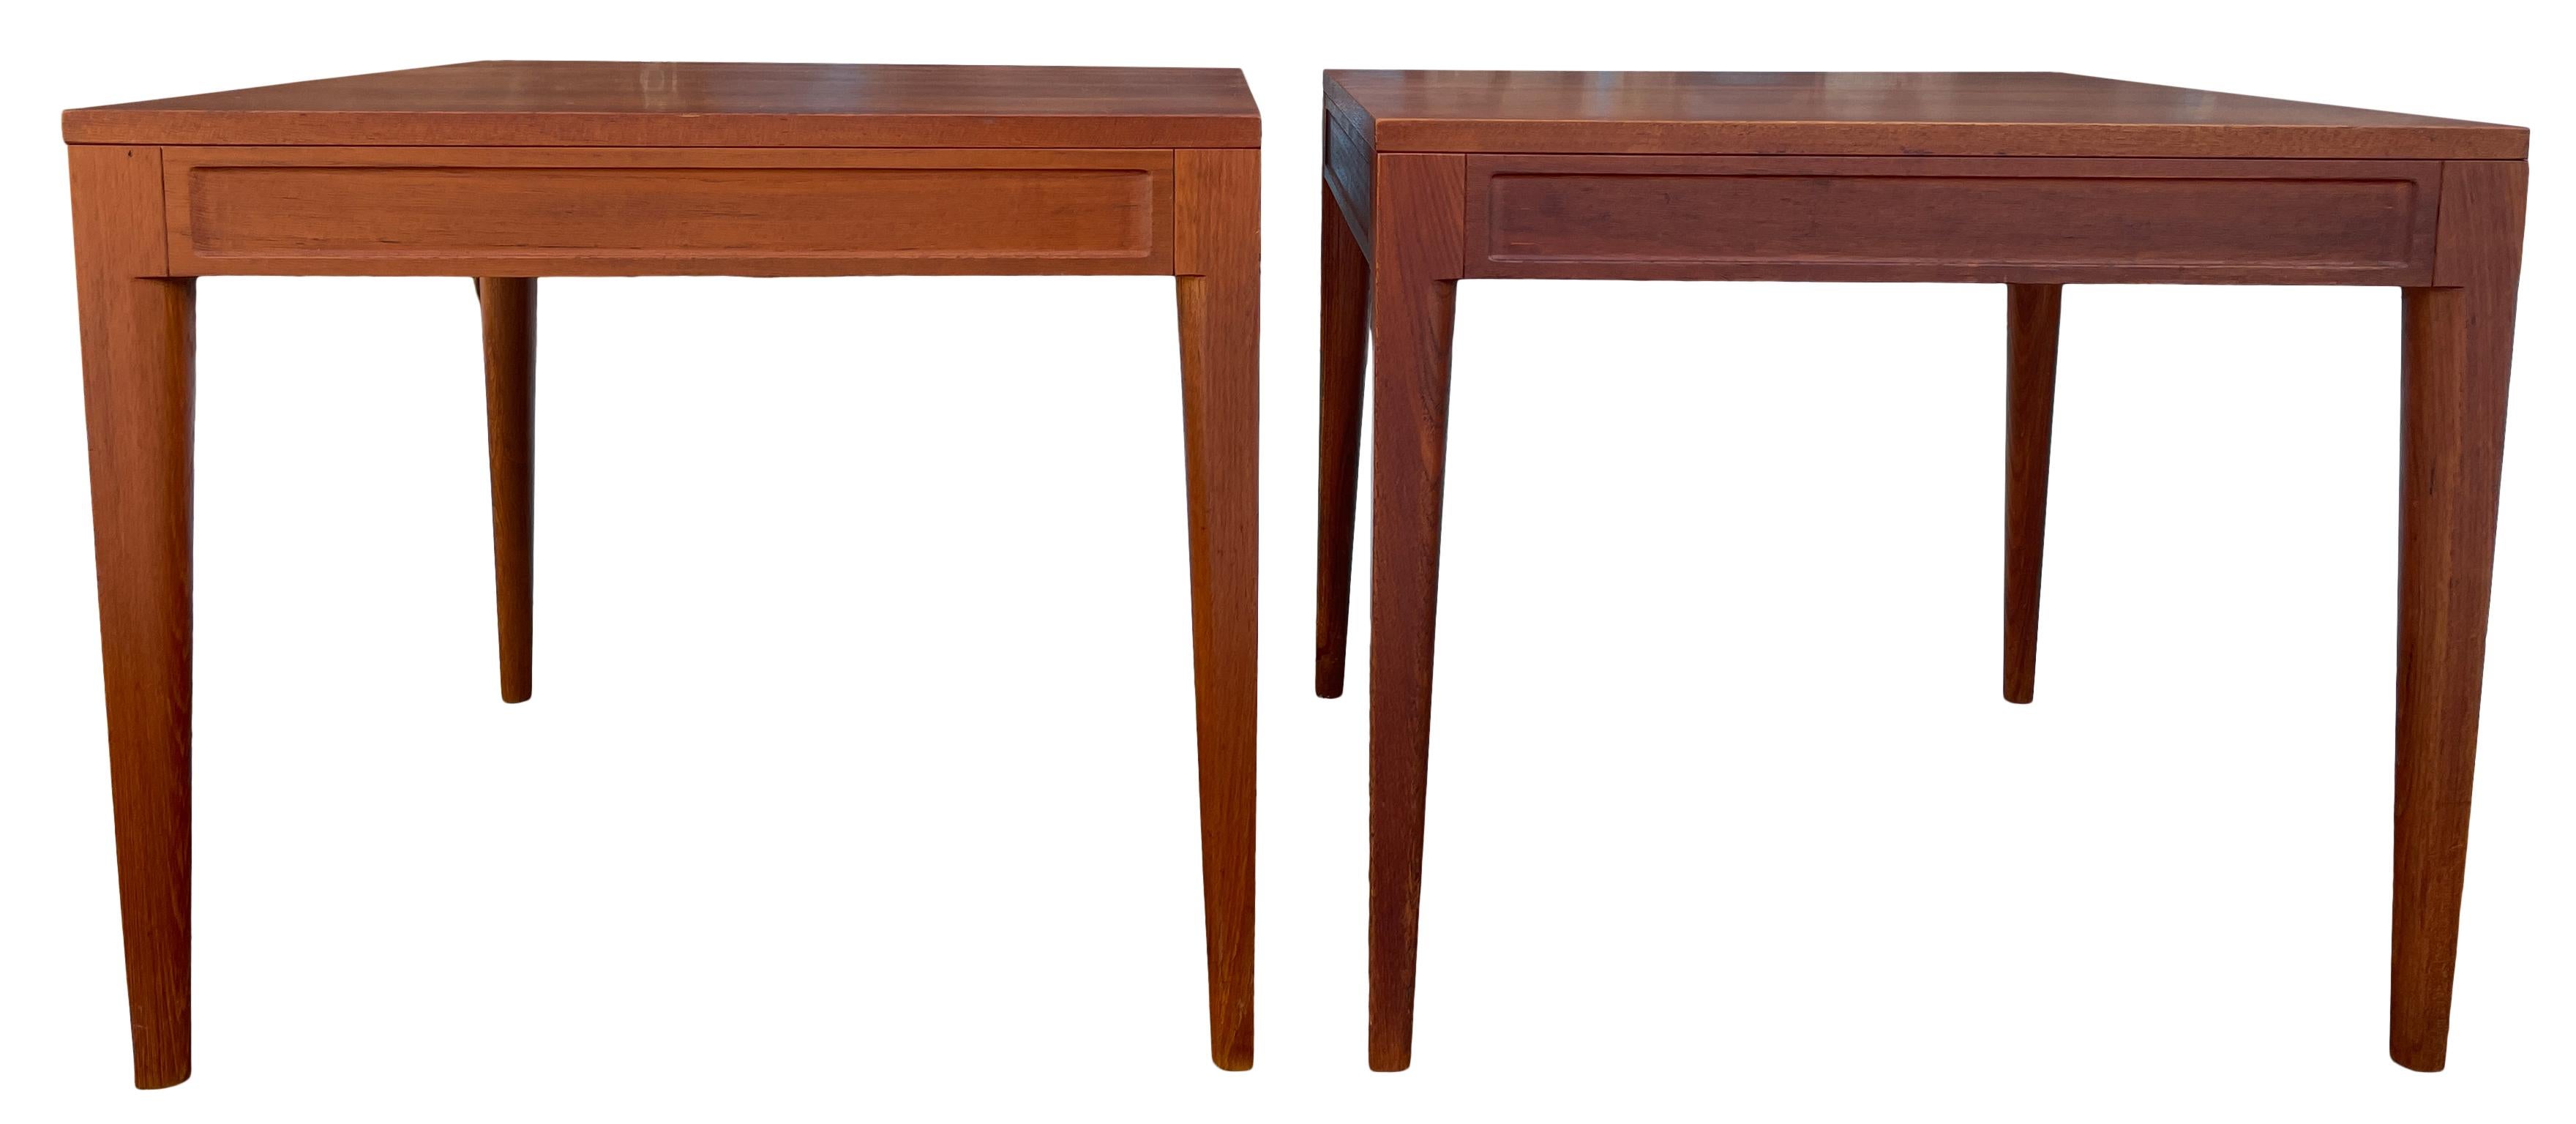 Elegant matching pair of Mid-Century Modern teak side tables or nightstands by France & Son. High Quality construction Teak side tables or nightstands.Solid teak and Brass screws - beautiful condition. Located in Brooklyn nyc

Both labeled made in